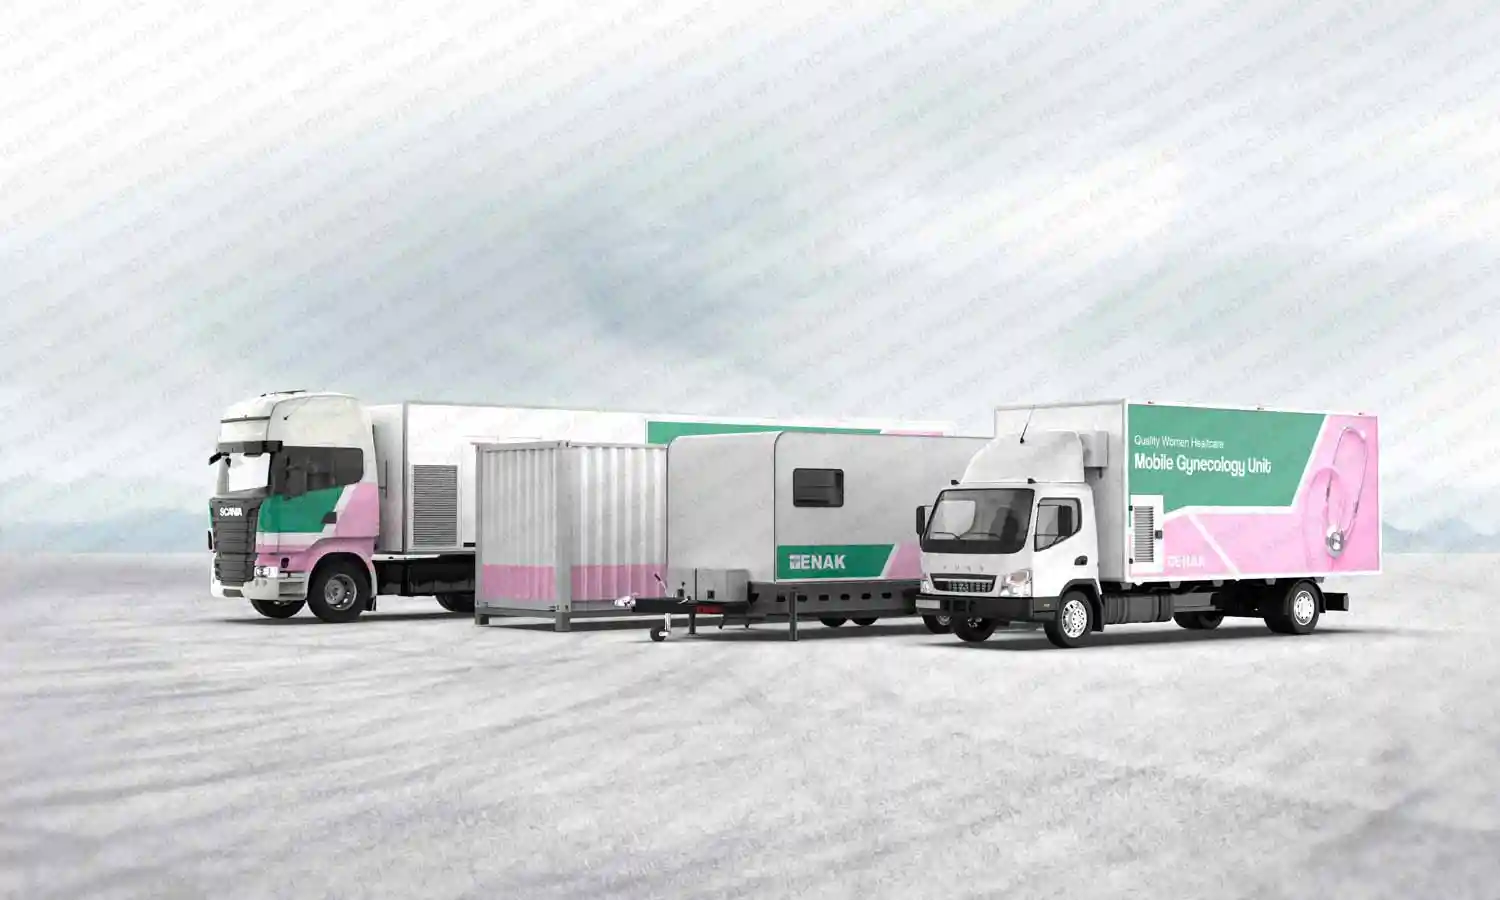 Mobile Gynecology Clinic